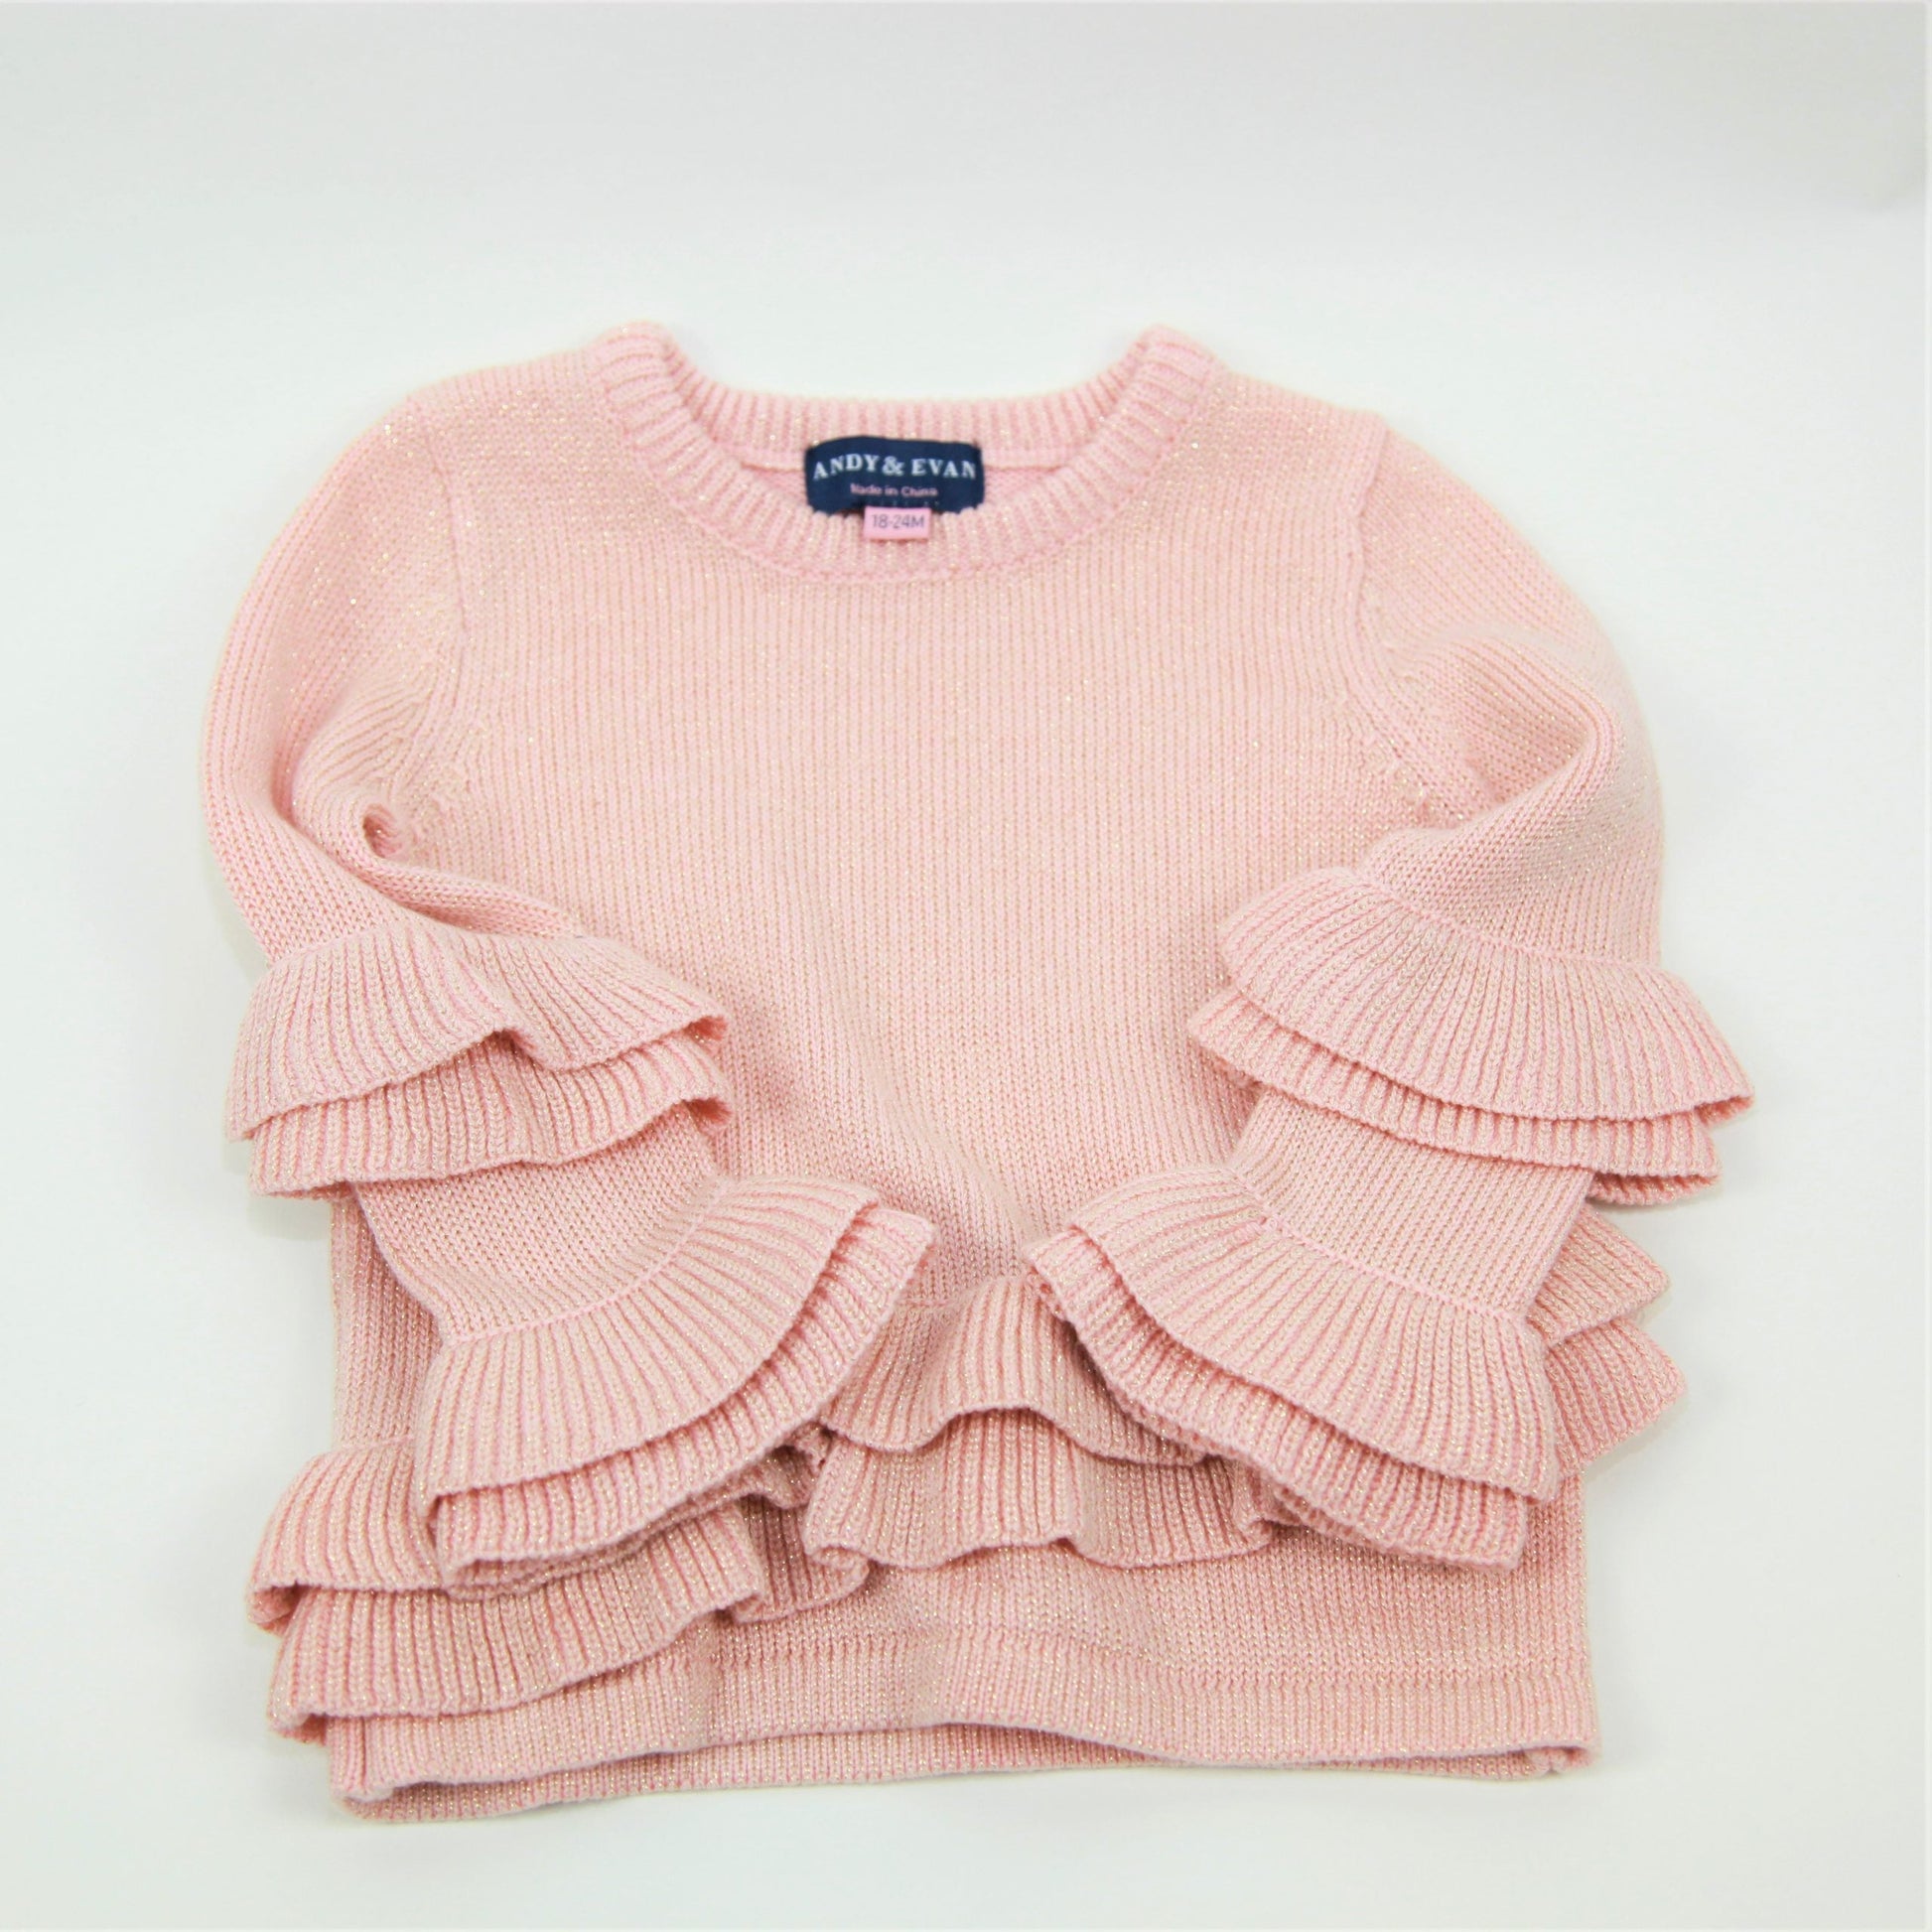 Andy & Evan Pink Shimmer sweater 18-24M 